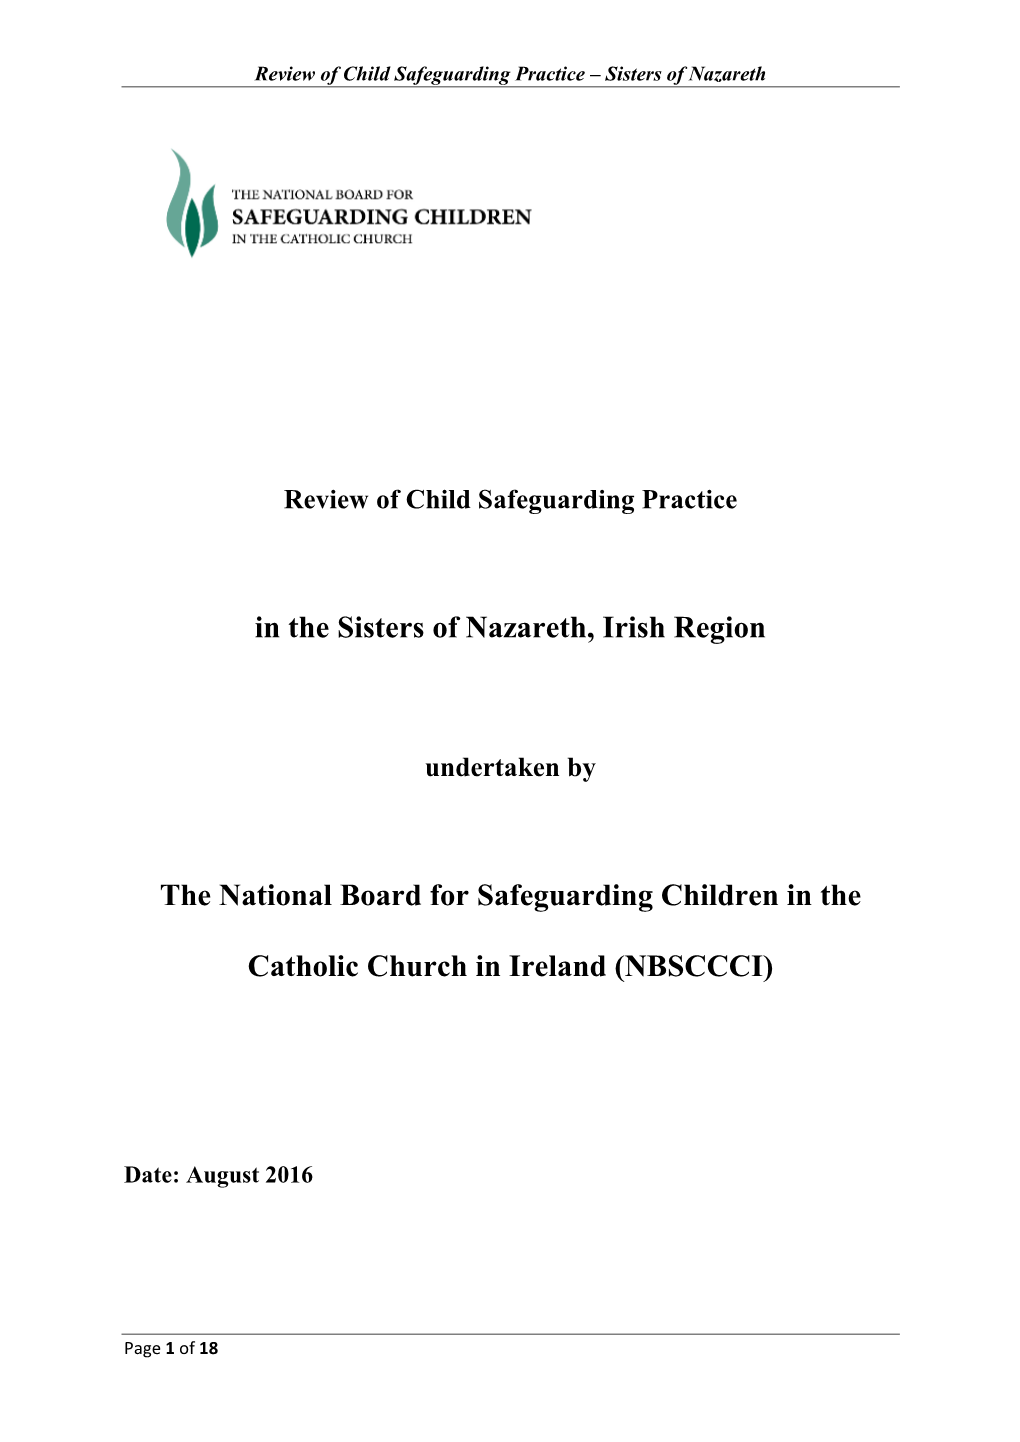 In the Sisters of Nazareth, Irish Region the National Board For